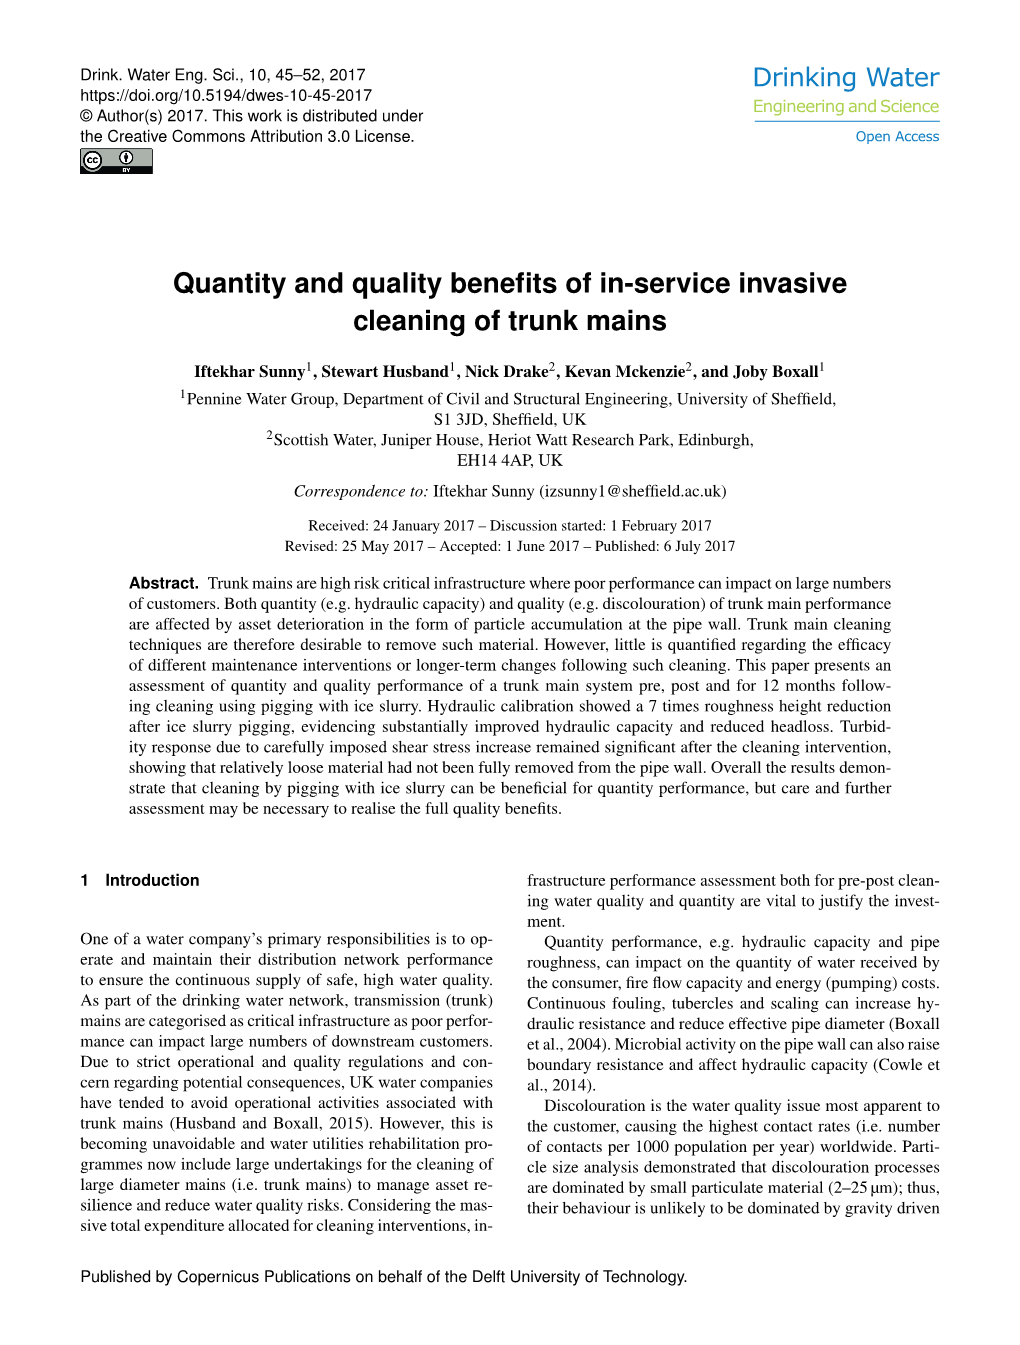 Quantity and Quality Benefits of In-Service Invasive Cleaning of Trunk